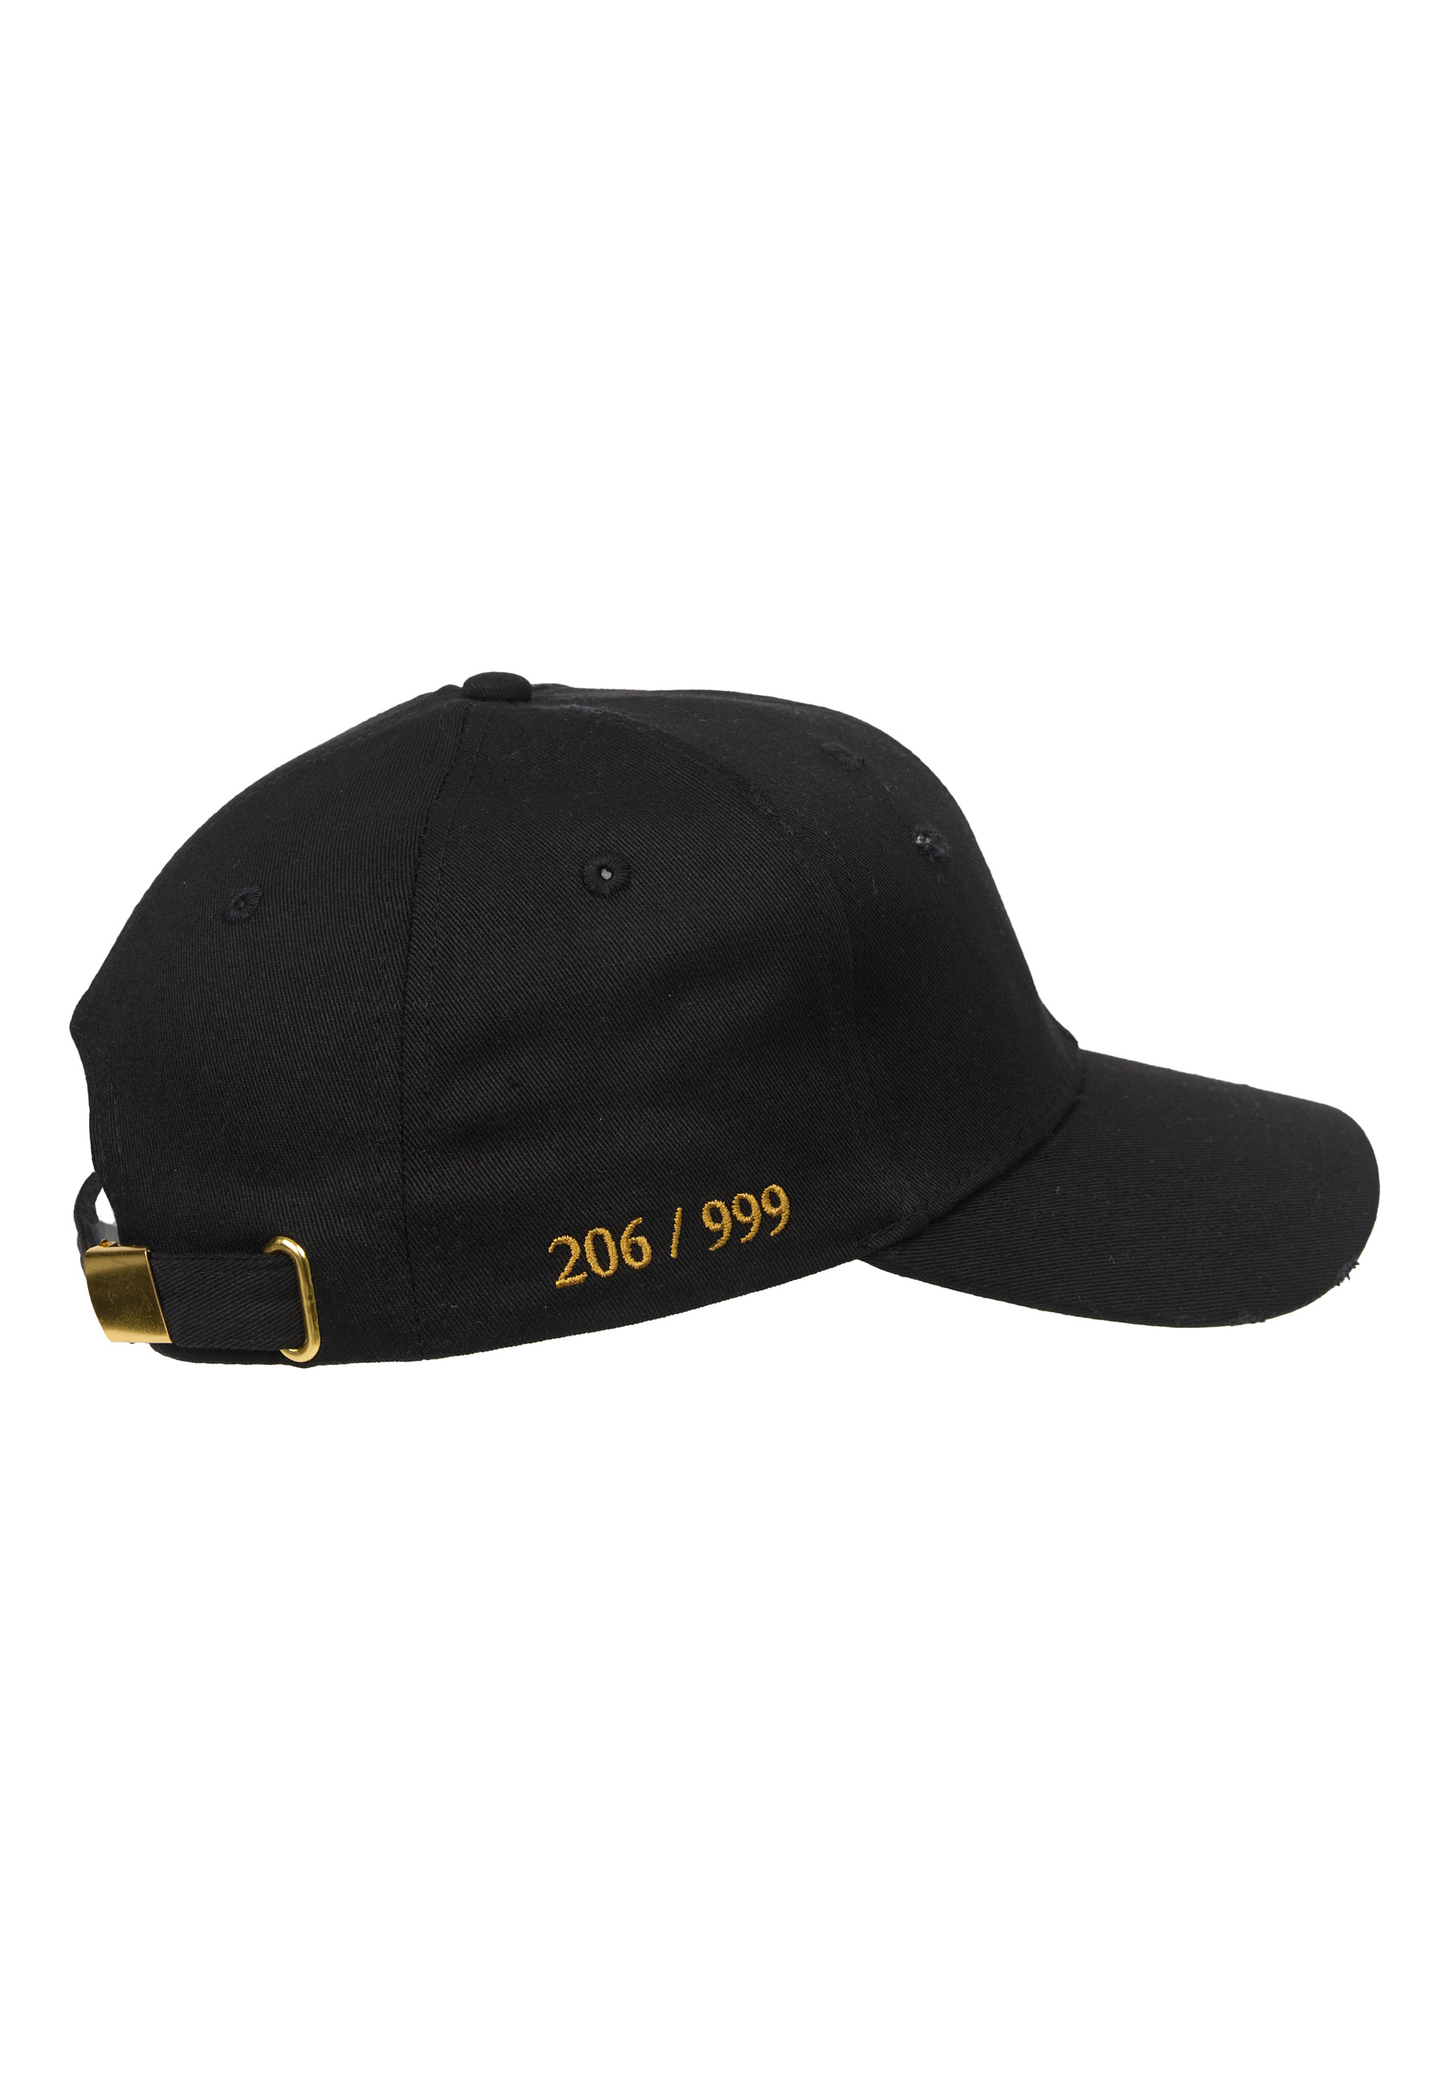 LUXAGER 1st EDITION Cap classic